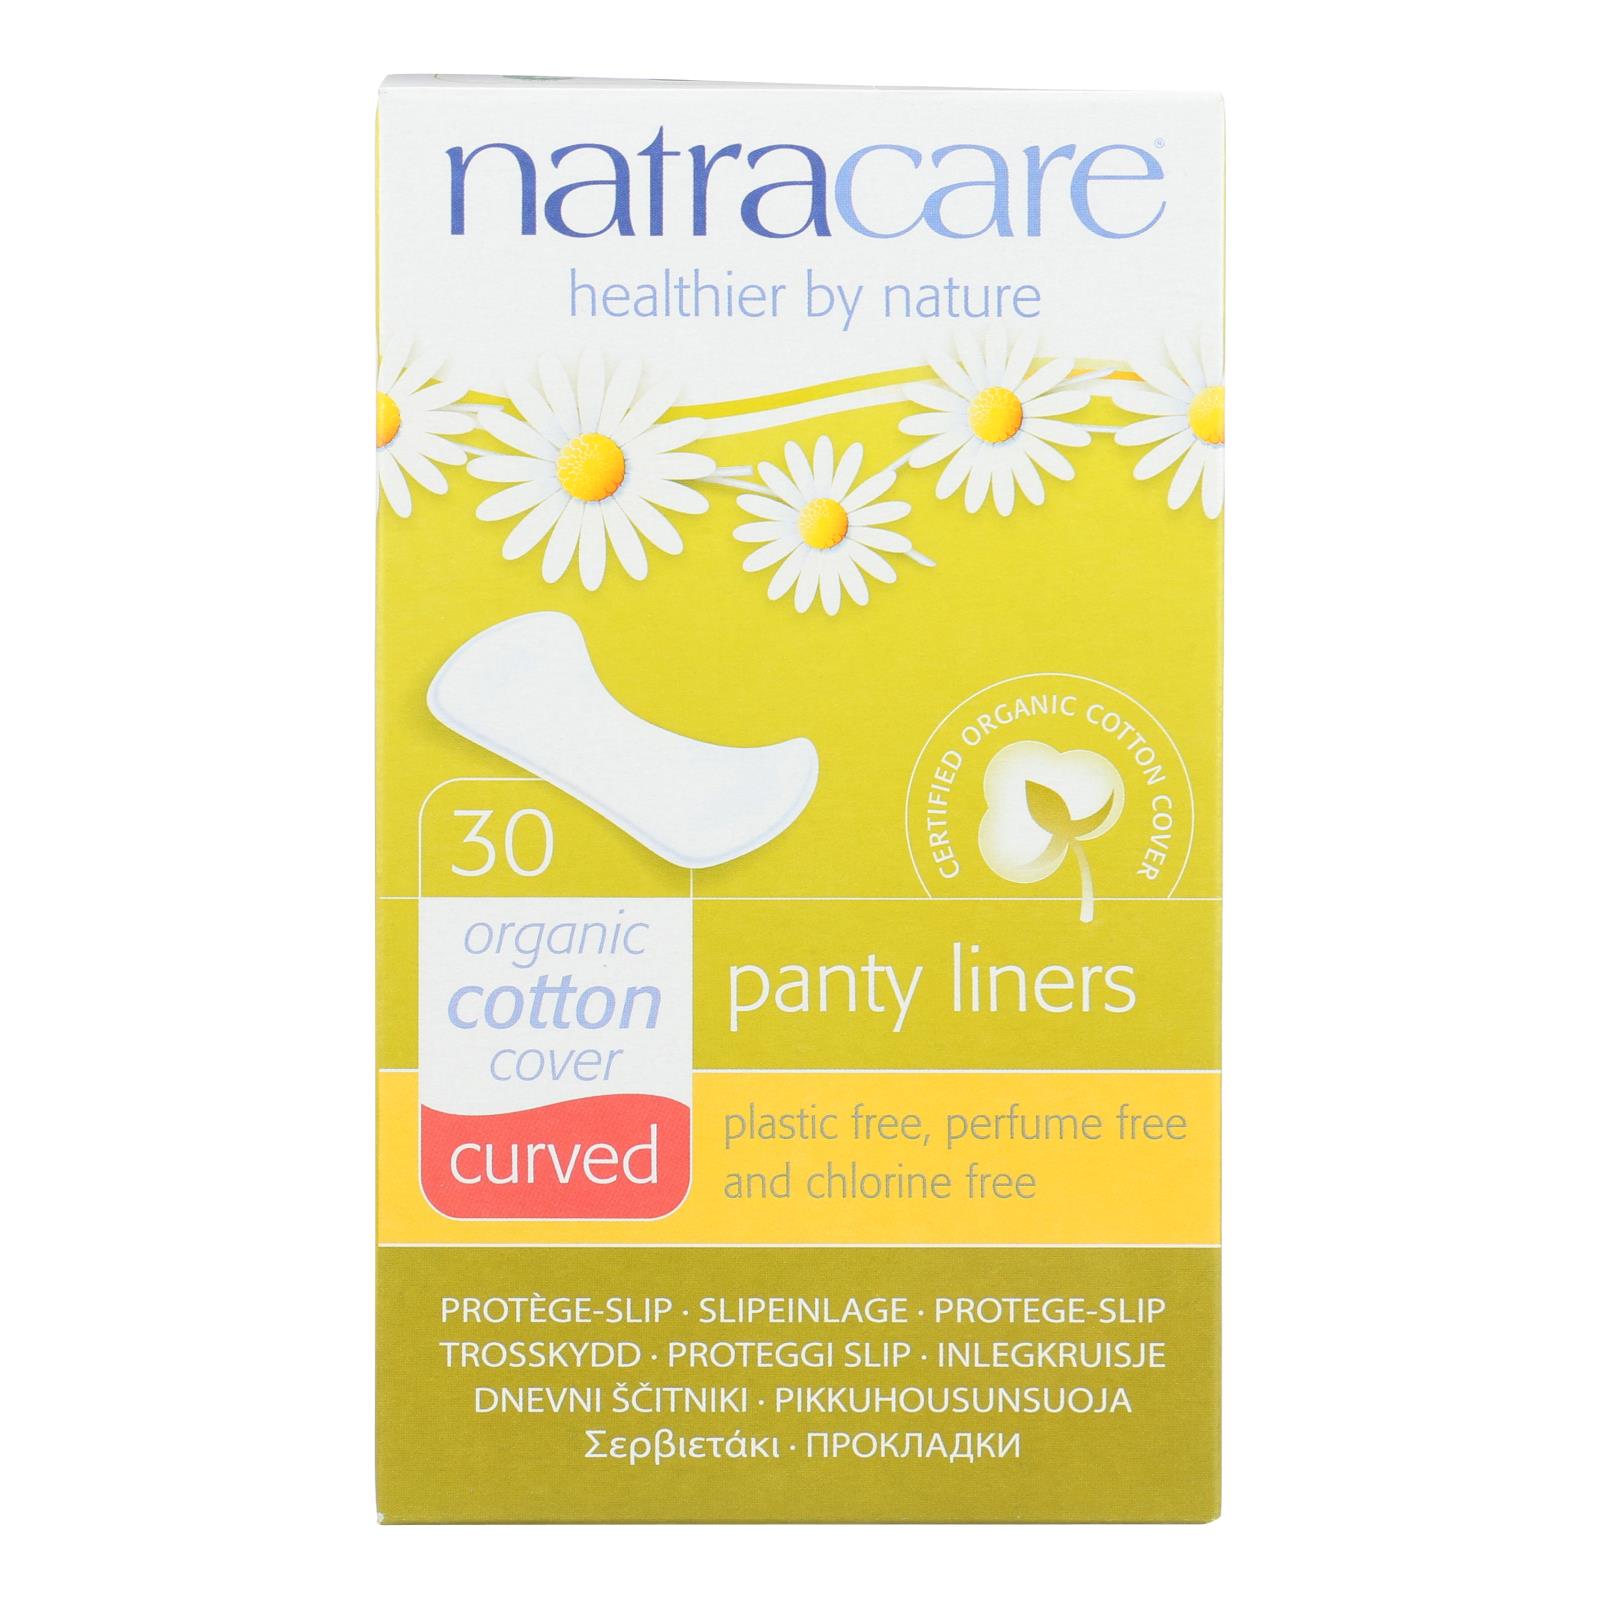 Natracare Curved Panty Liners - Case of 16 - 30 CT